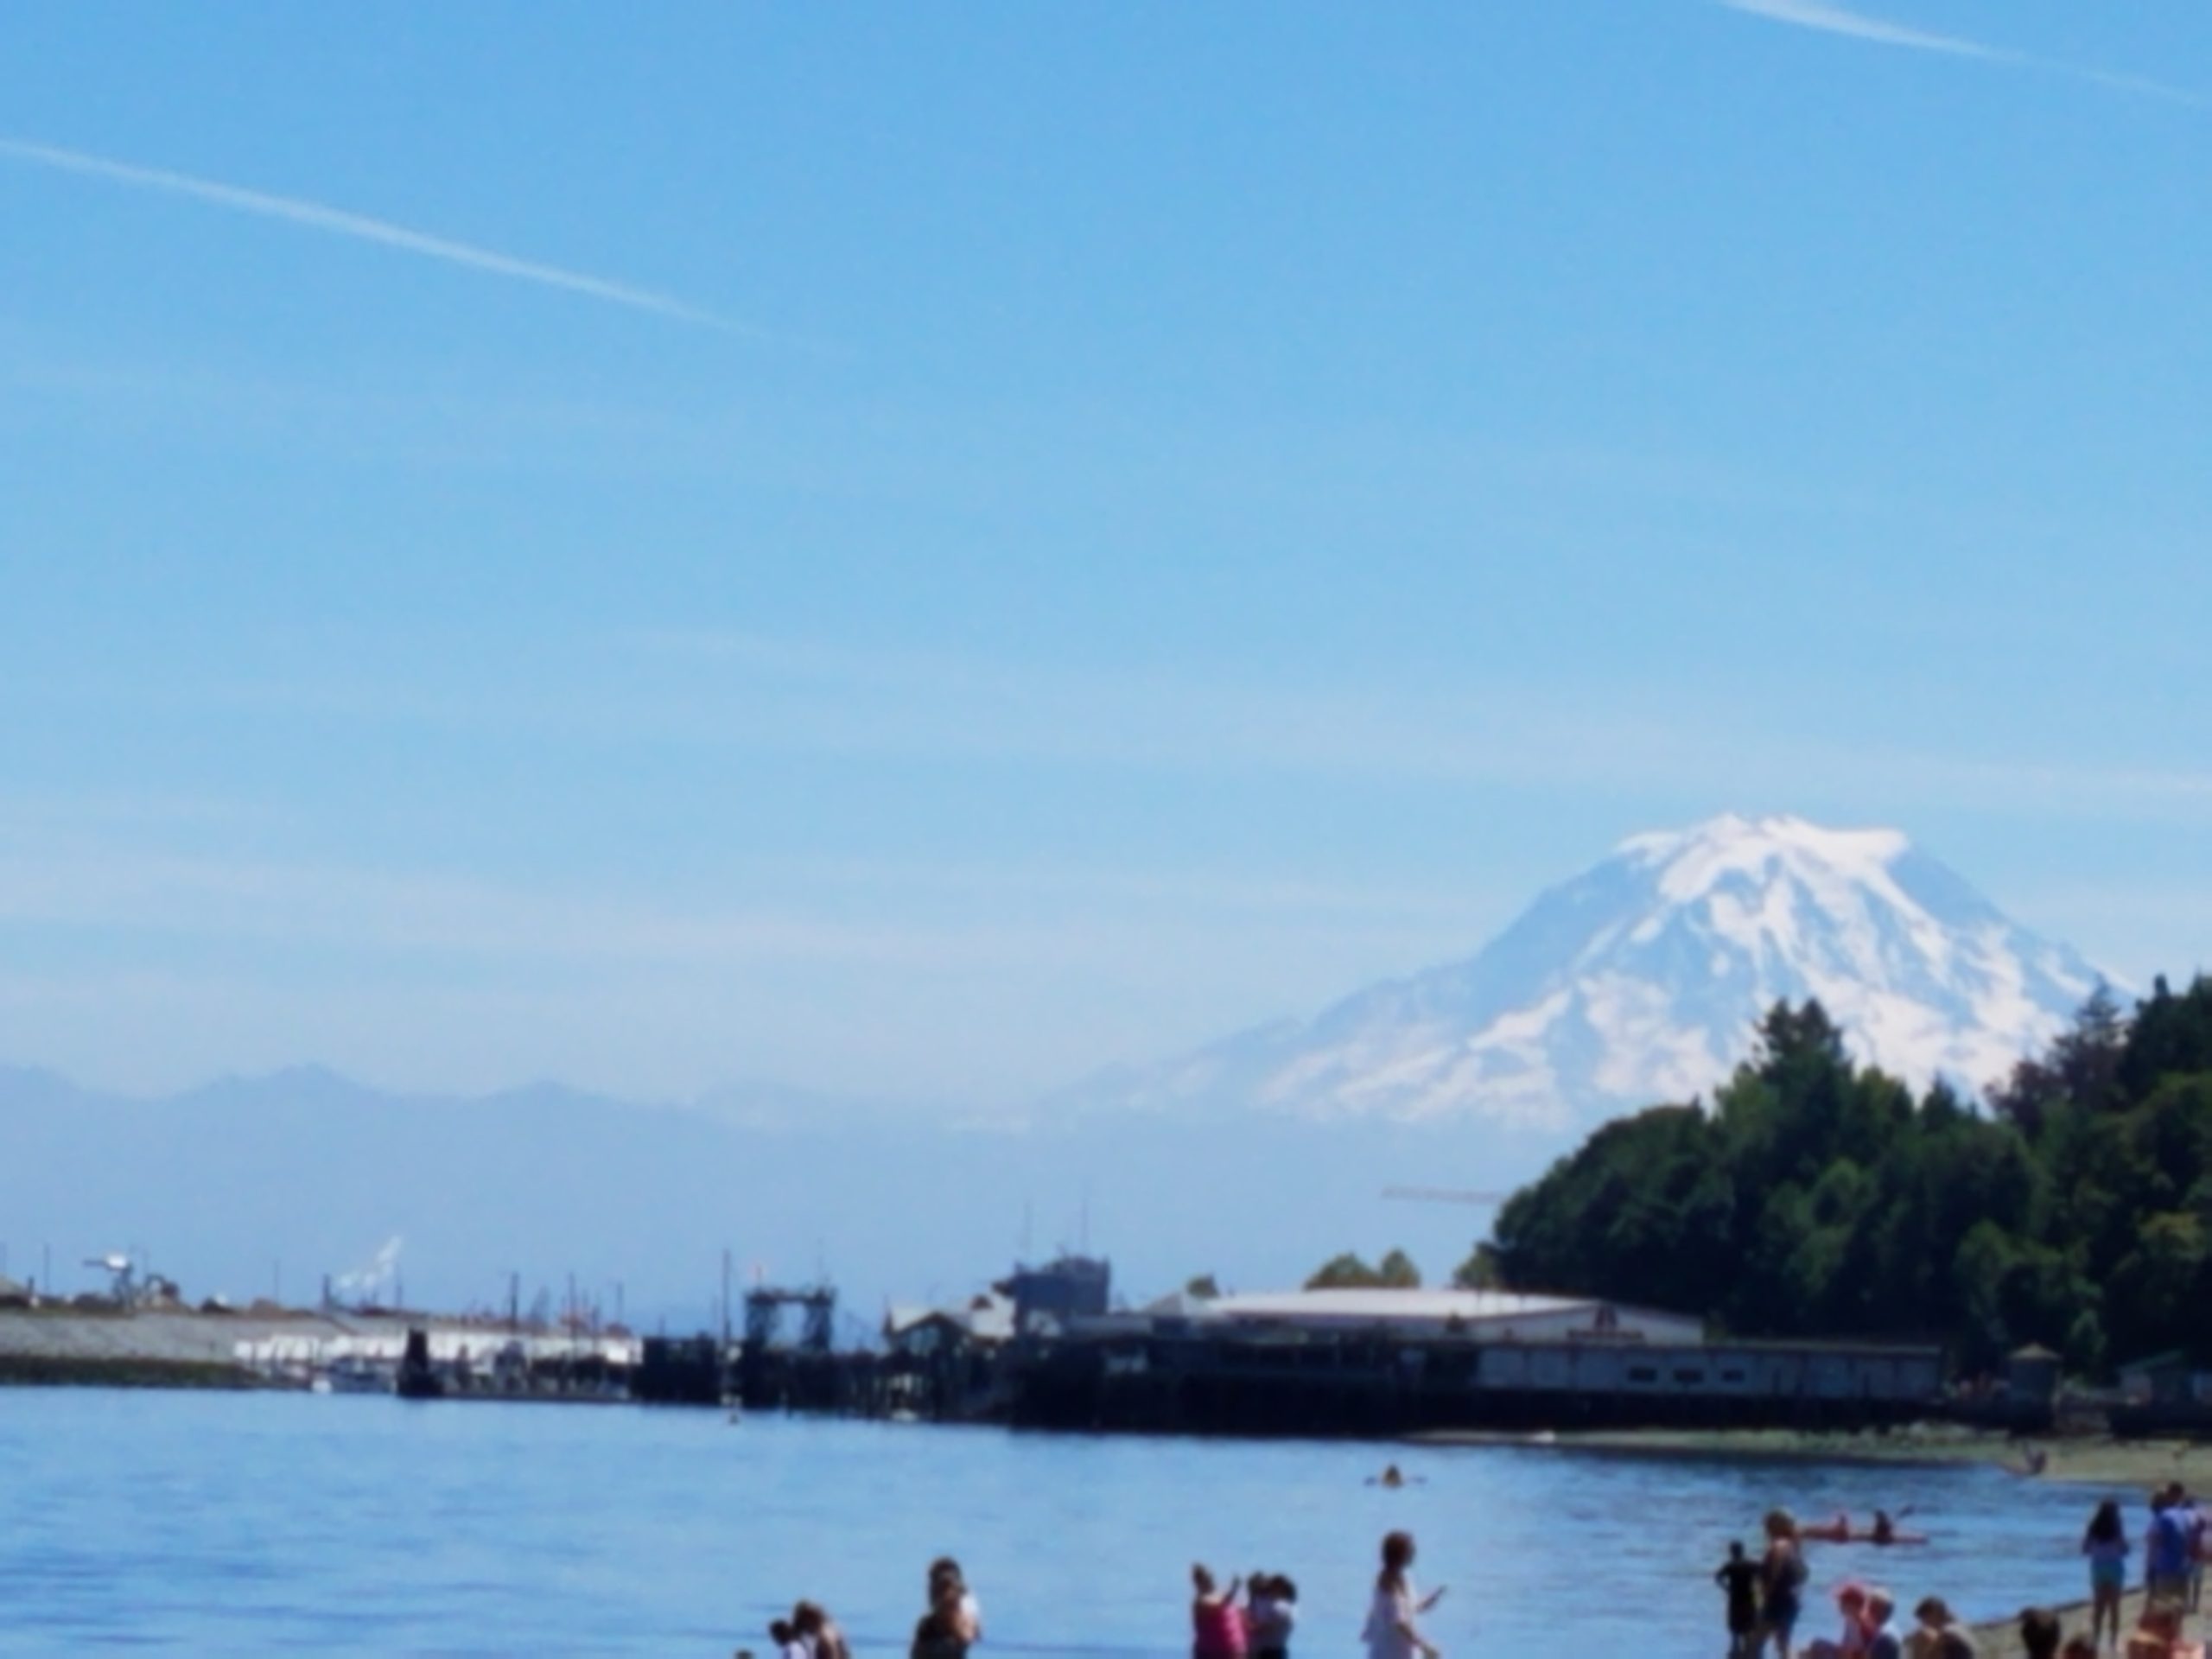 A group of people on a beach with mt rainier in the background.